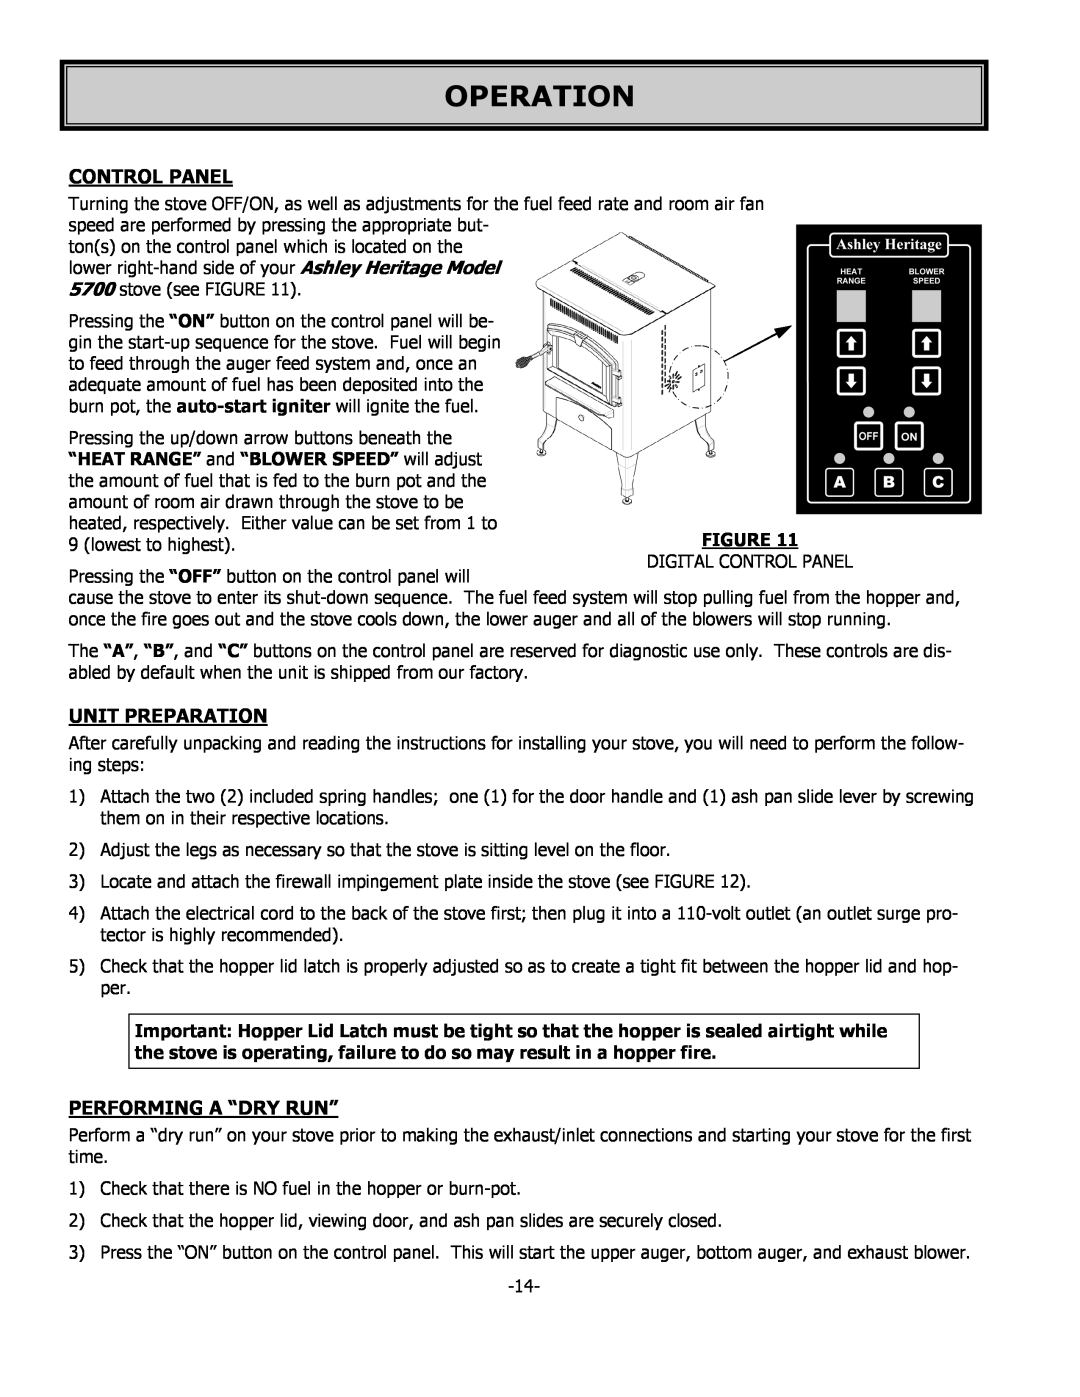 United States Stove 5700 owner manual Control Panel, Unit Preparation, Performing A “Dry Run”, Operation 